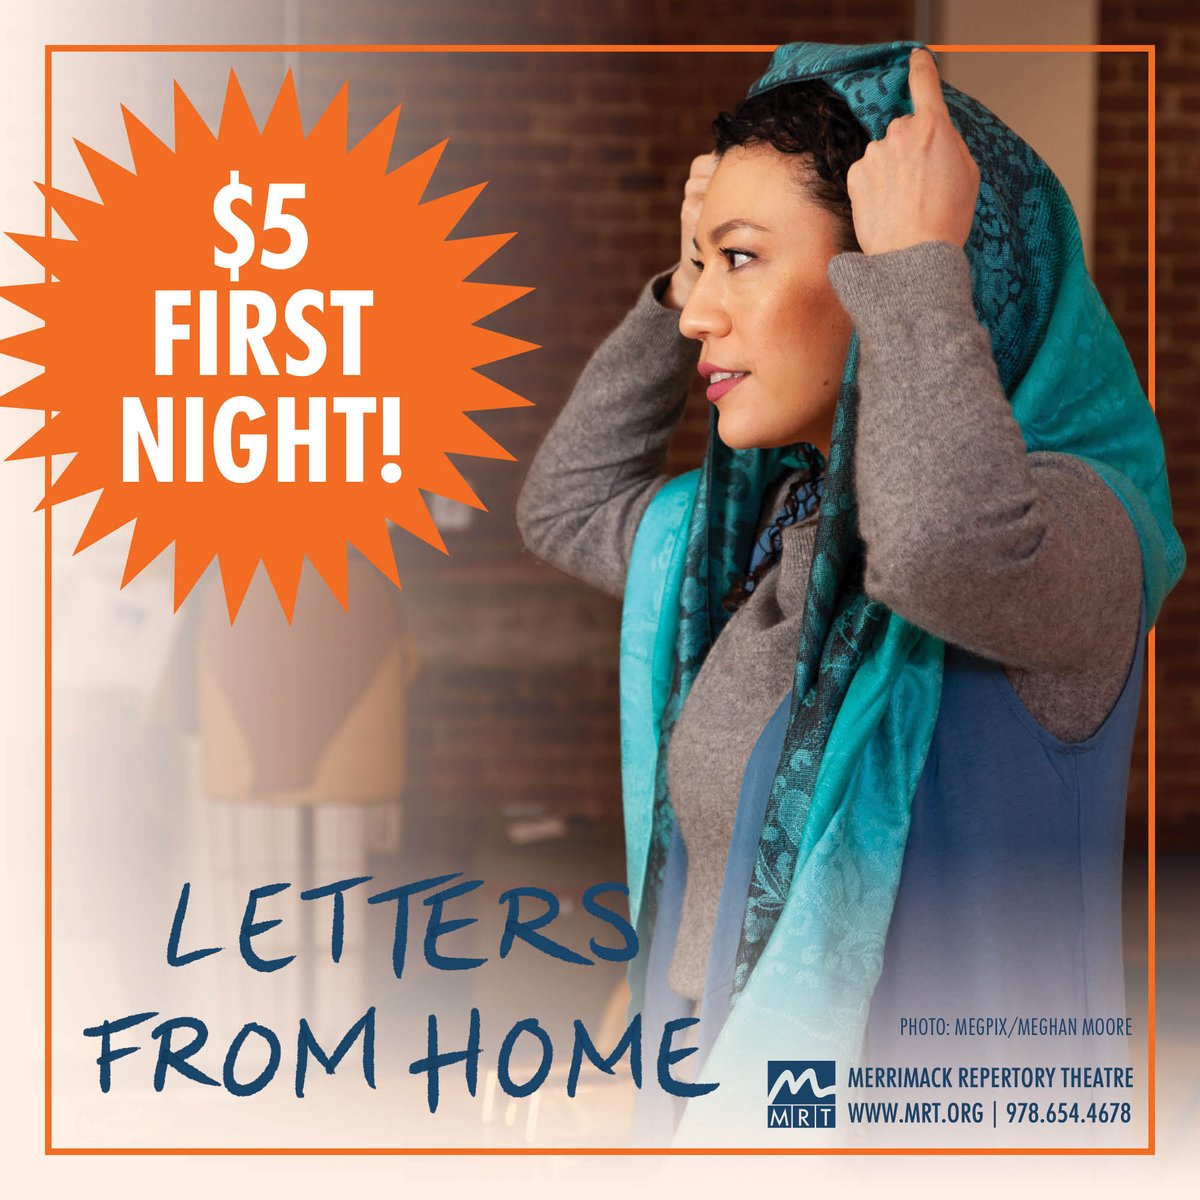 Join us tonight for the first East Coast preview of Letters from Home for only $5. One Night Only! Complimentary beer and pizza to be provided following the show #likelowell #merrimackvalley #livetheatre